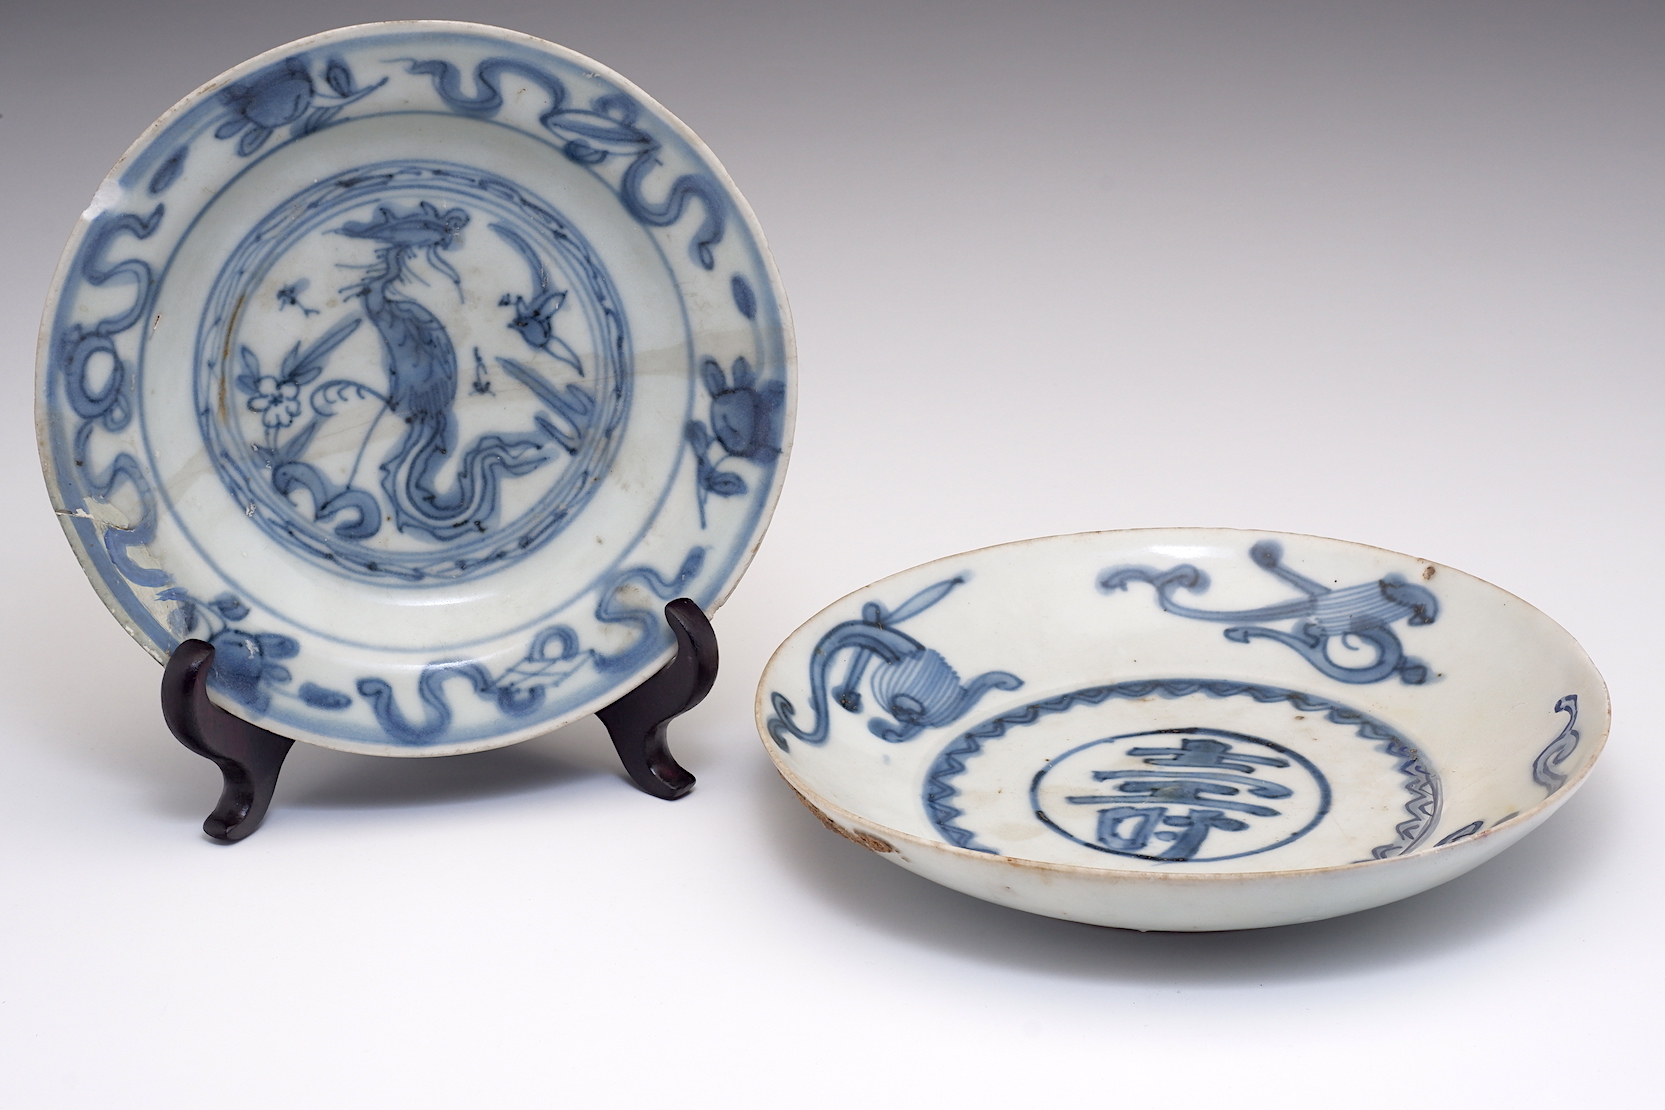 'Two Chinese Late Ming Zhangzhou Swatow Blue and White Dishes, Wanli Period Circa 1600-1620'